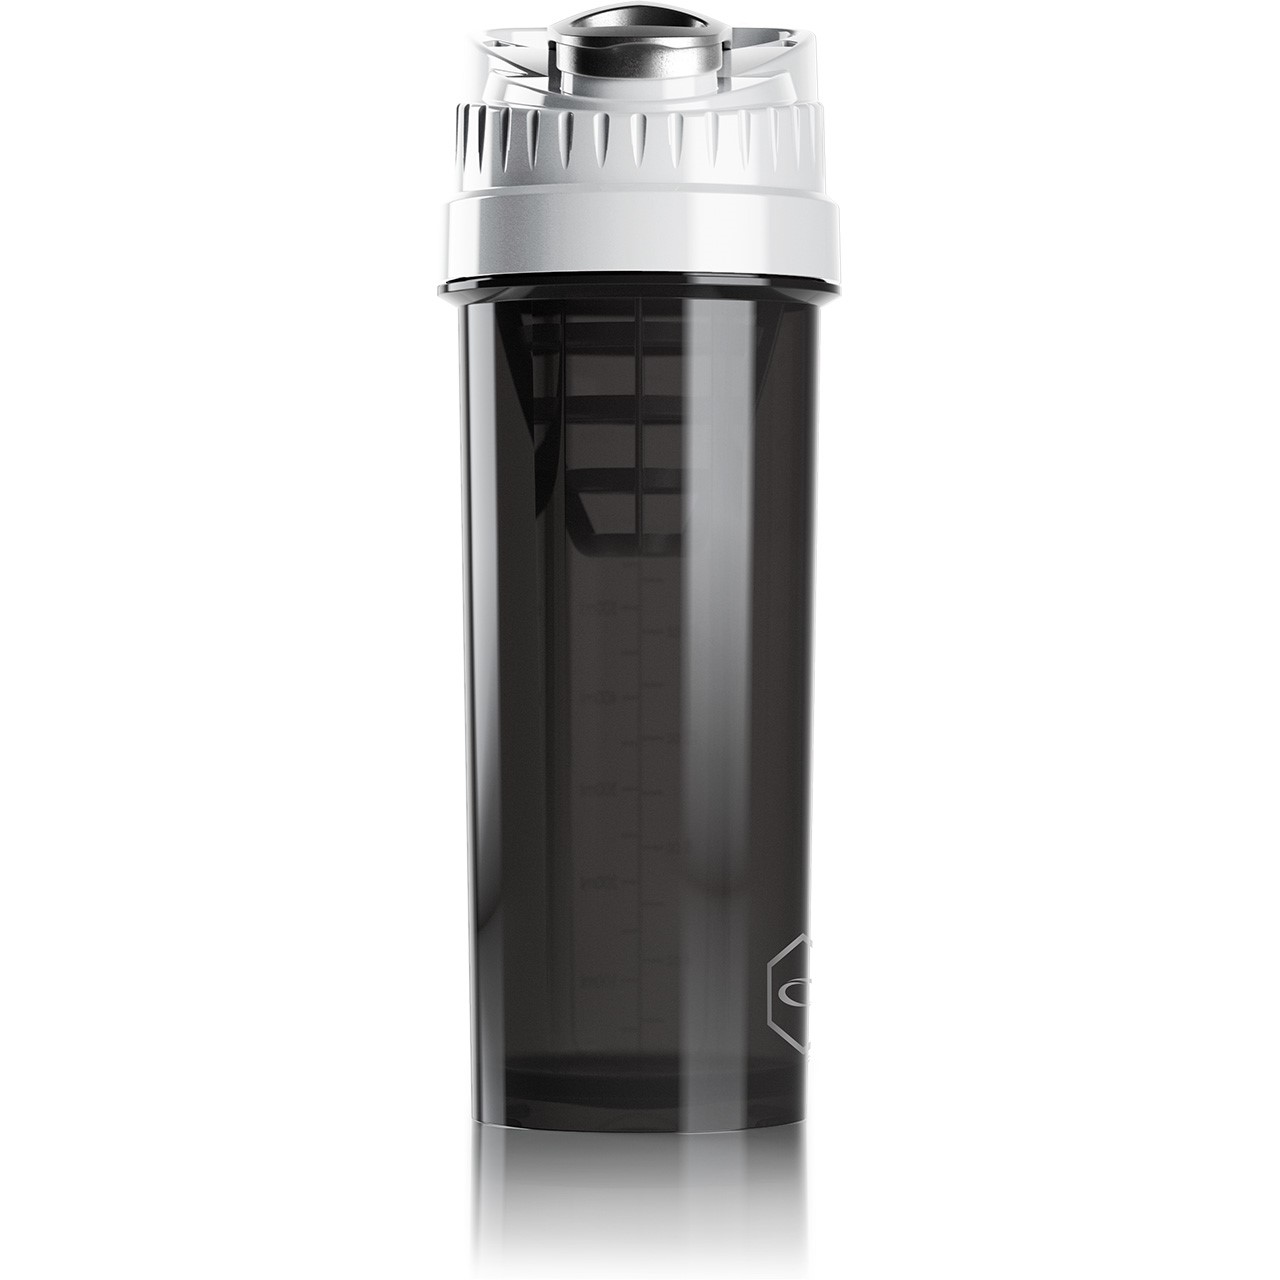 New Protein Shaker Cyclone Cup Weiss 950 ml